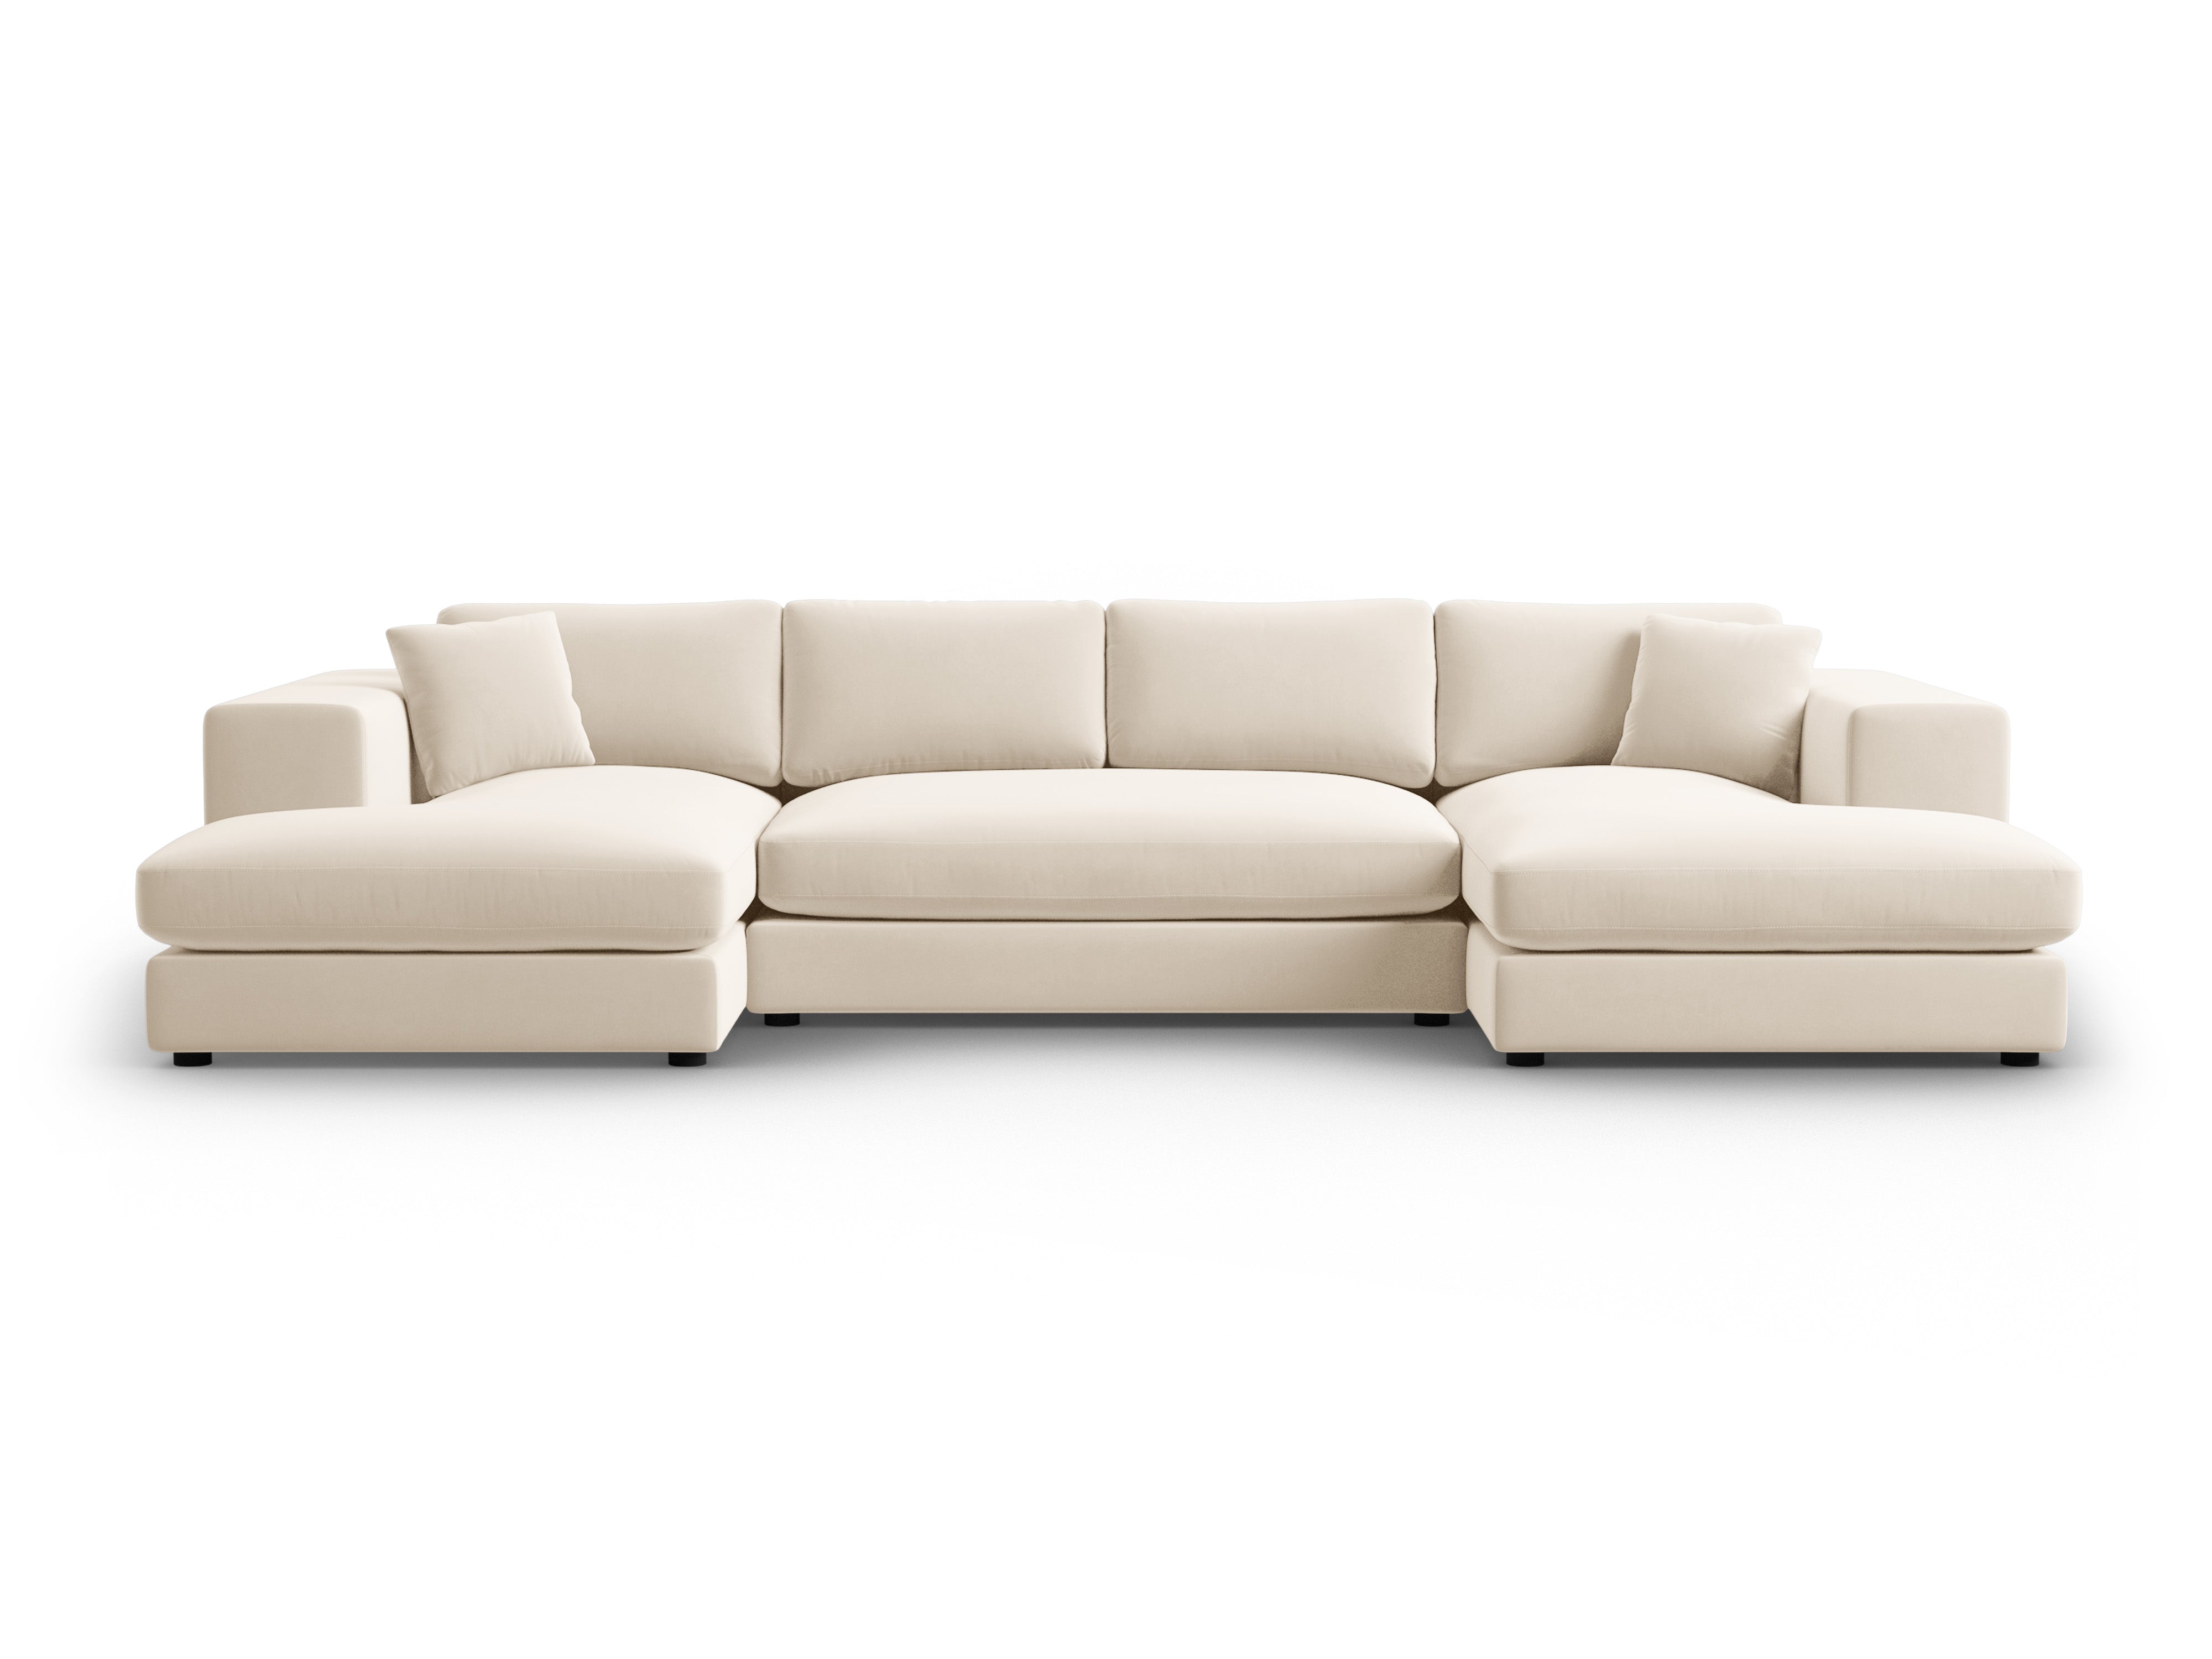 Velvet Panoramic Sofa, "Tendance", 5 Seats, 344x170x72 Made in Europe, CXL by Christian Lacroix, Eye on Design